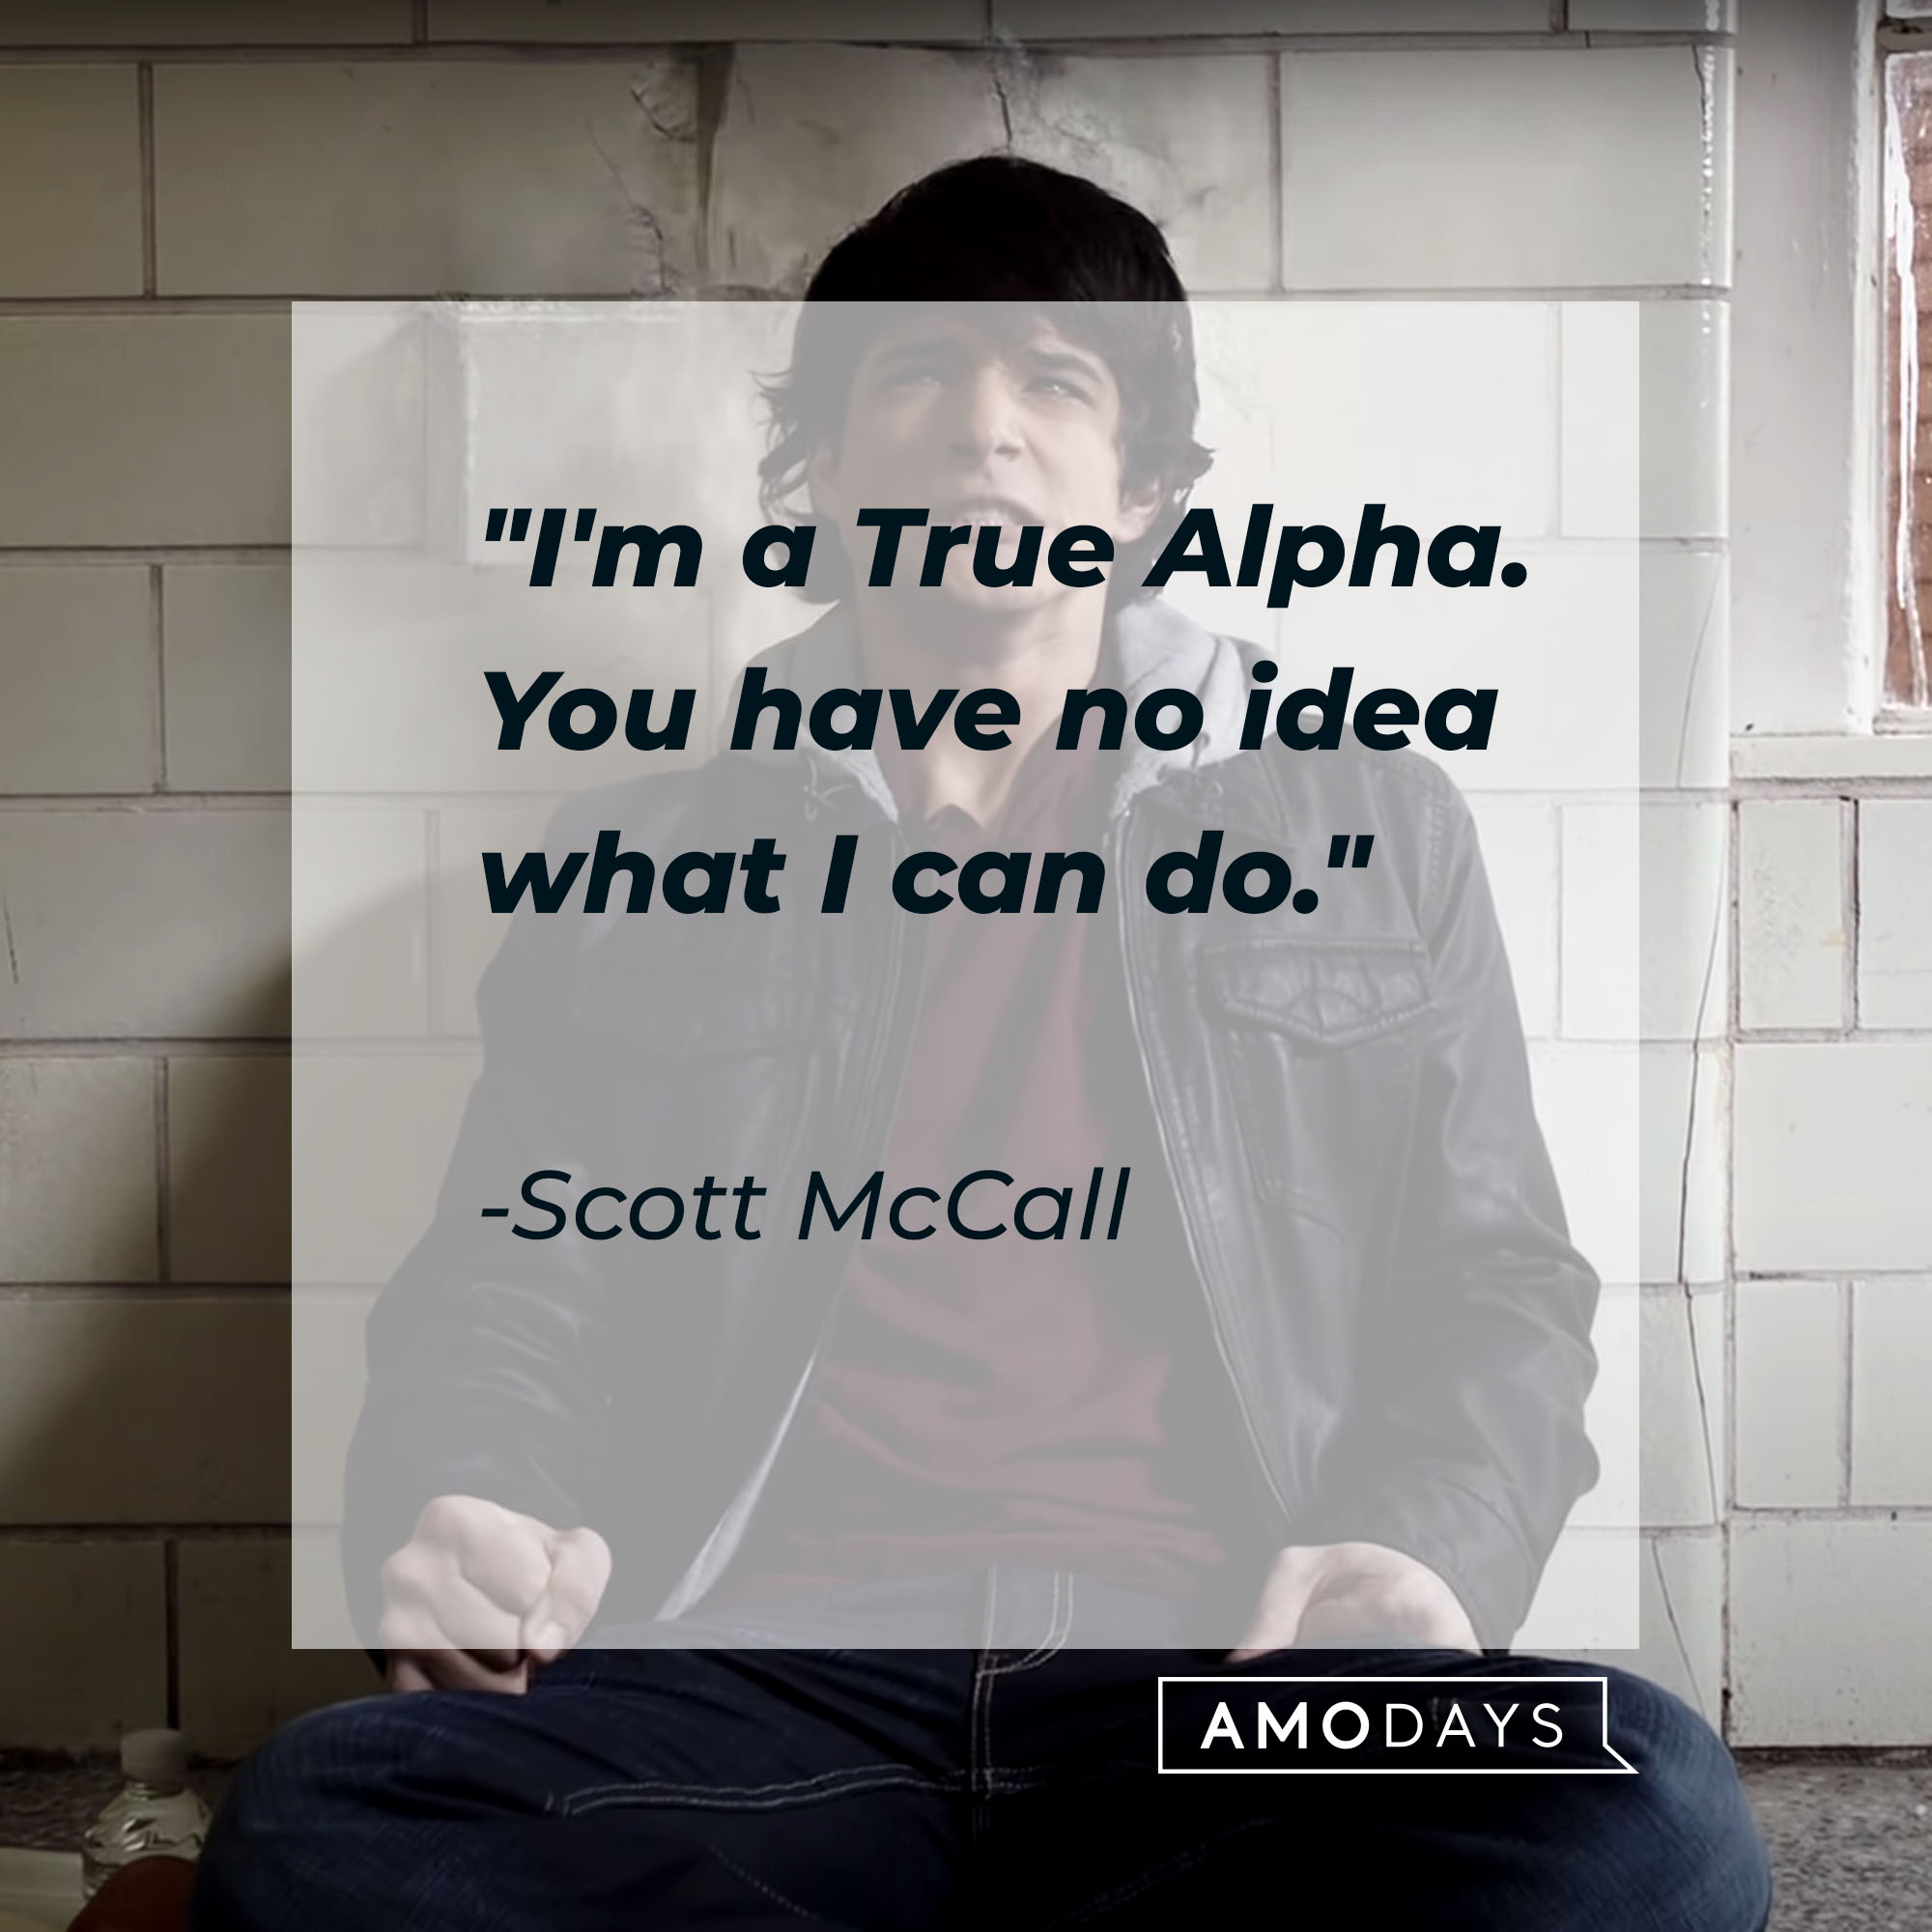 Scott McCall's quote: "I'm a True Alpha. You have no idea what I can do" | Source: Youtube.com/WolfWatch